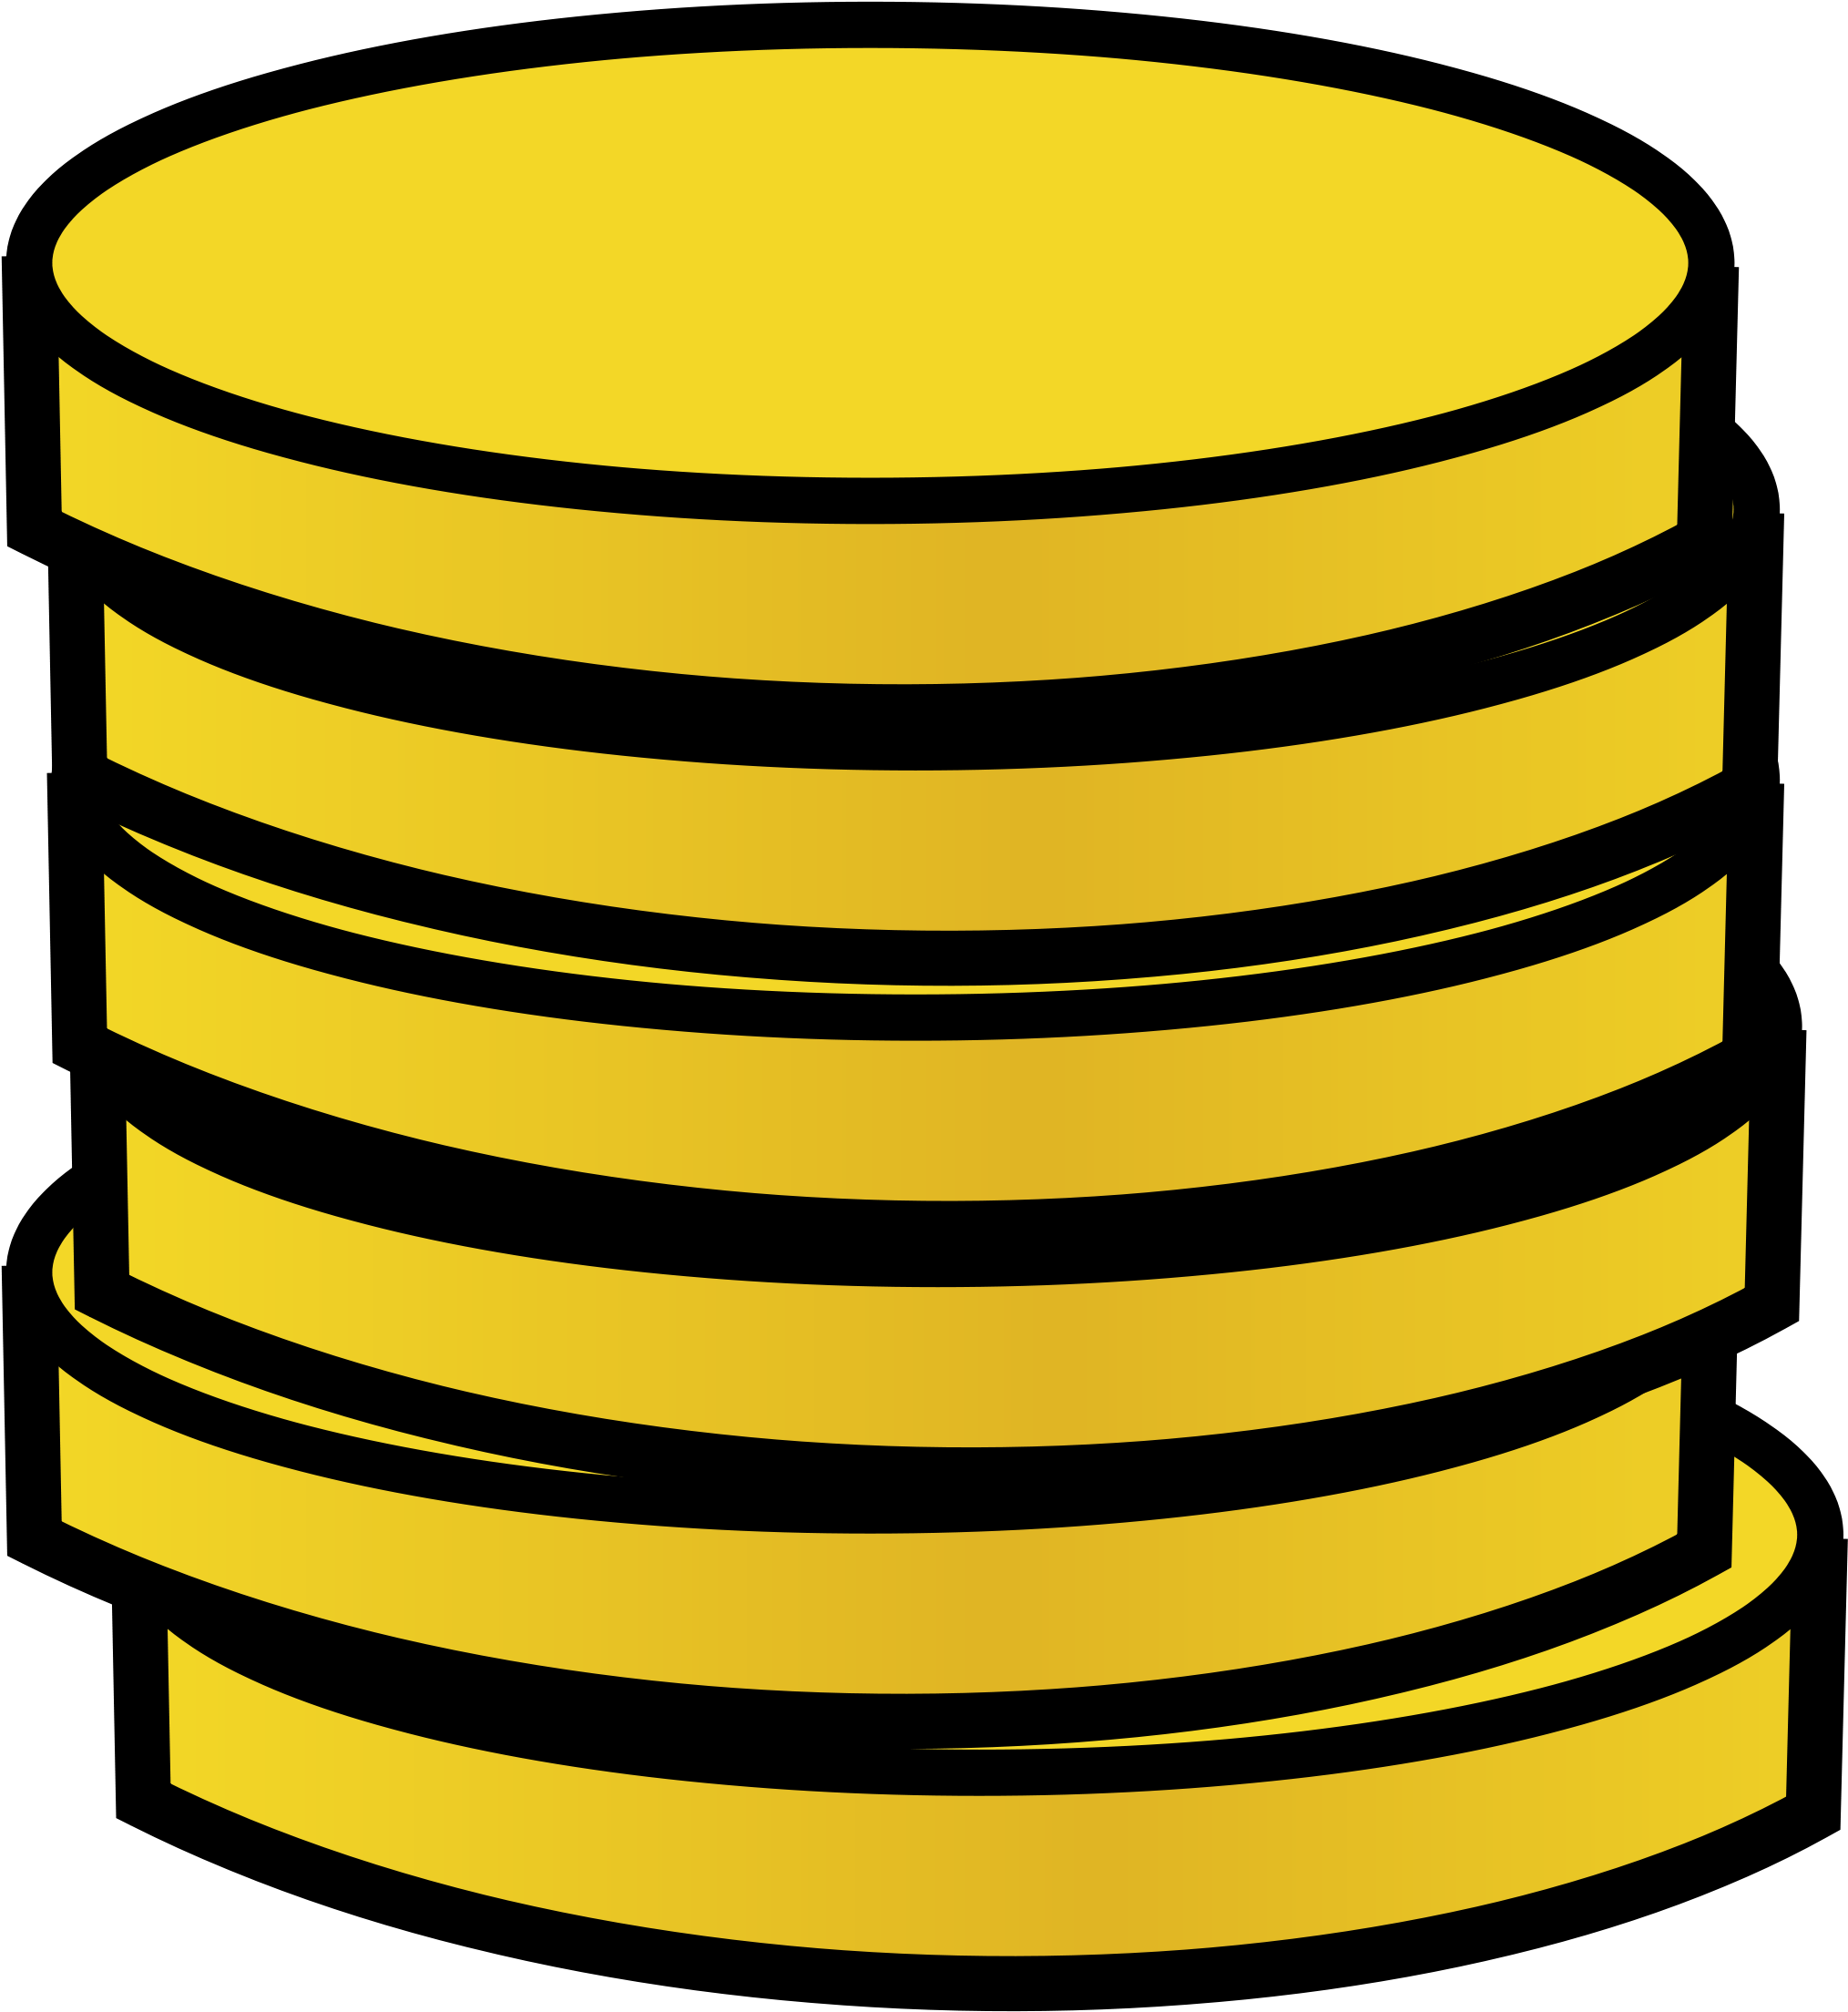 Gold Coin Clipart - Cartoon Gold Coins - Full Size PNG Clipart Images ...